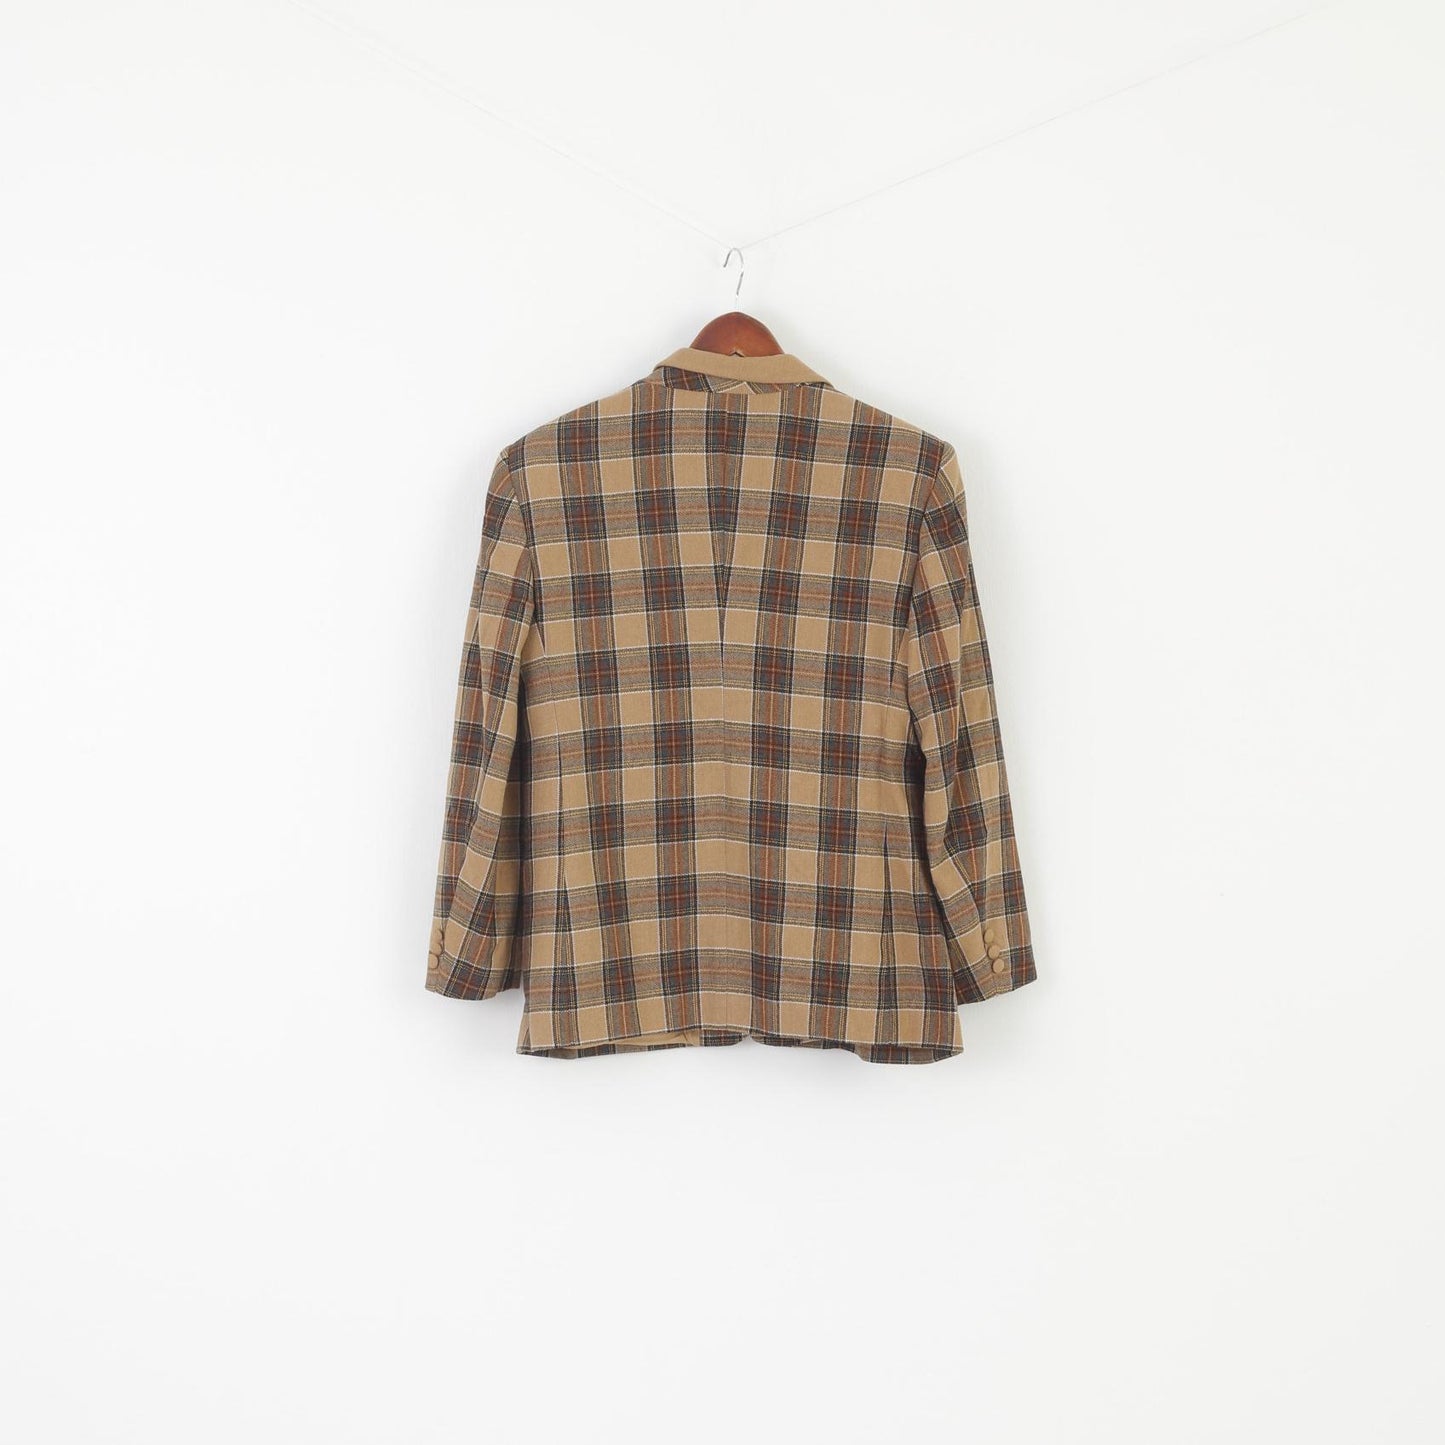 Giorgia Netti Women 18 44 L Blazer Brown Check Wool Vintage Made in Italy Jacket